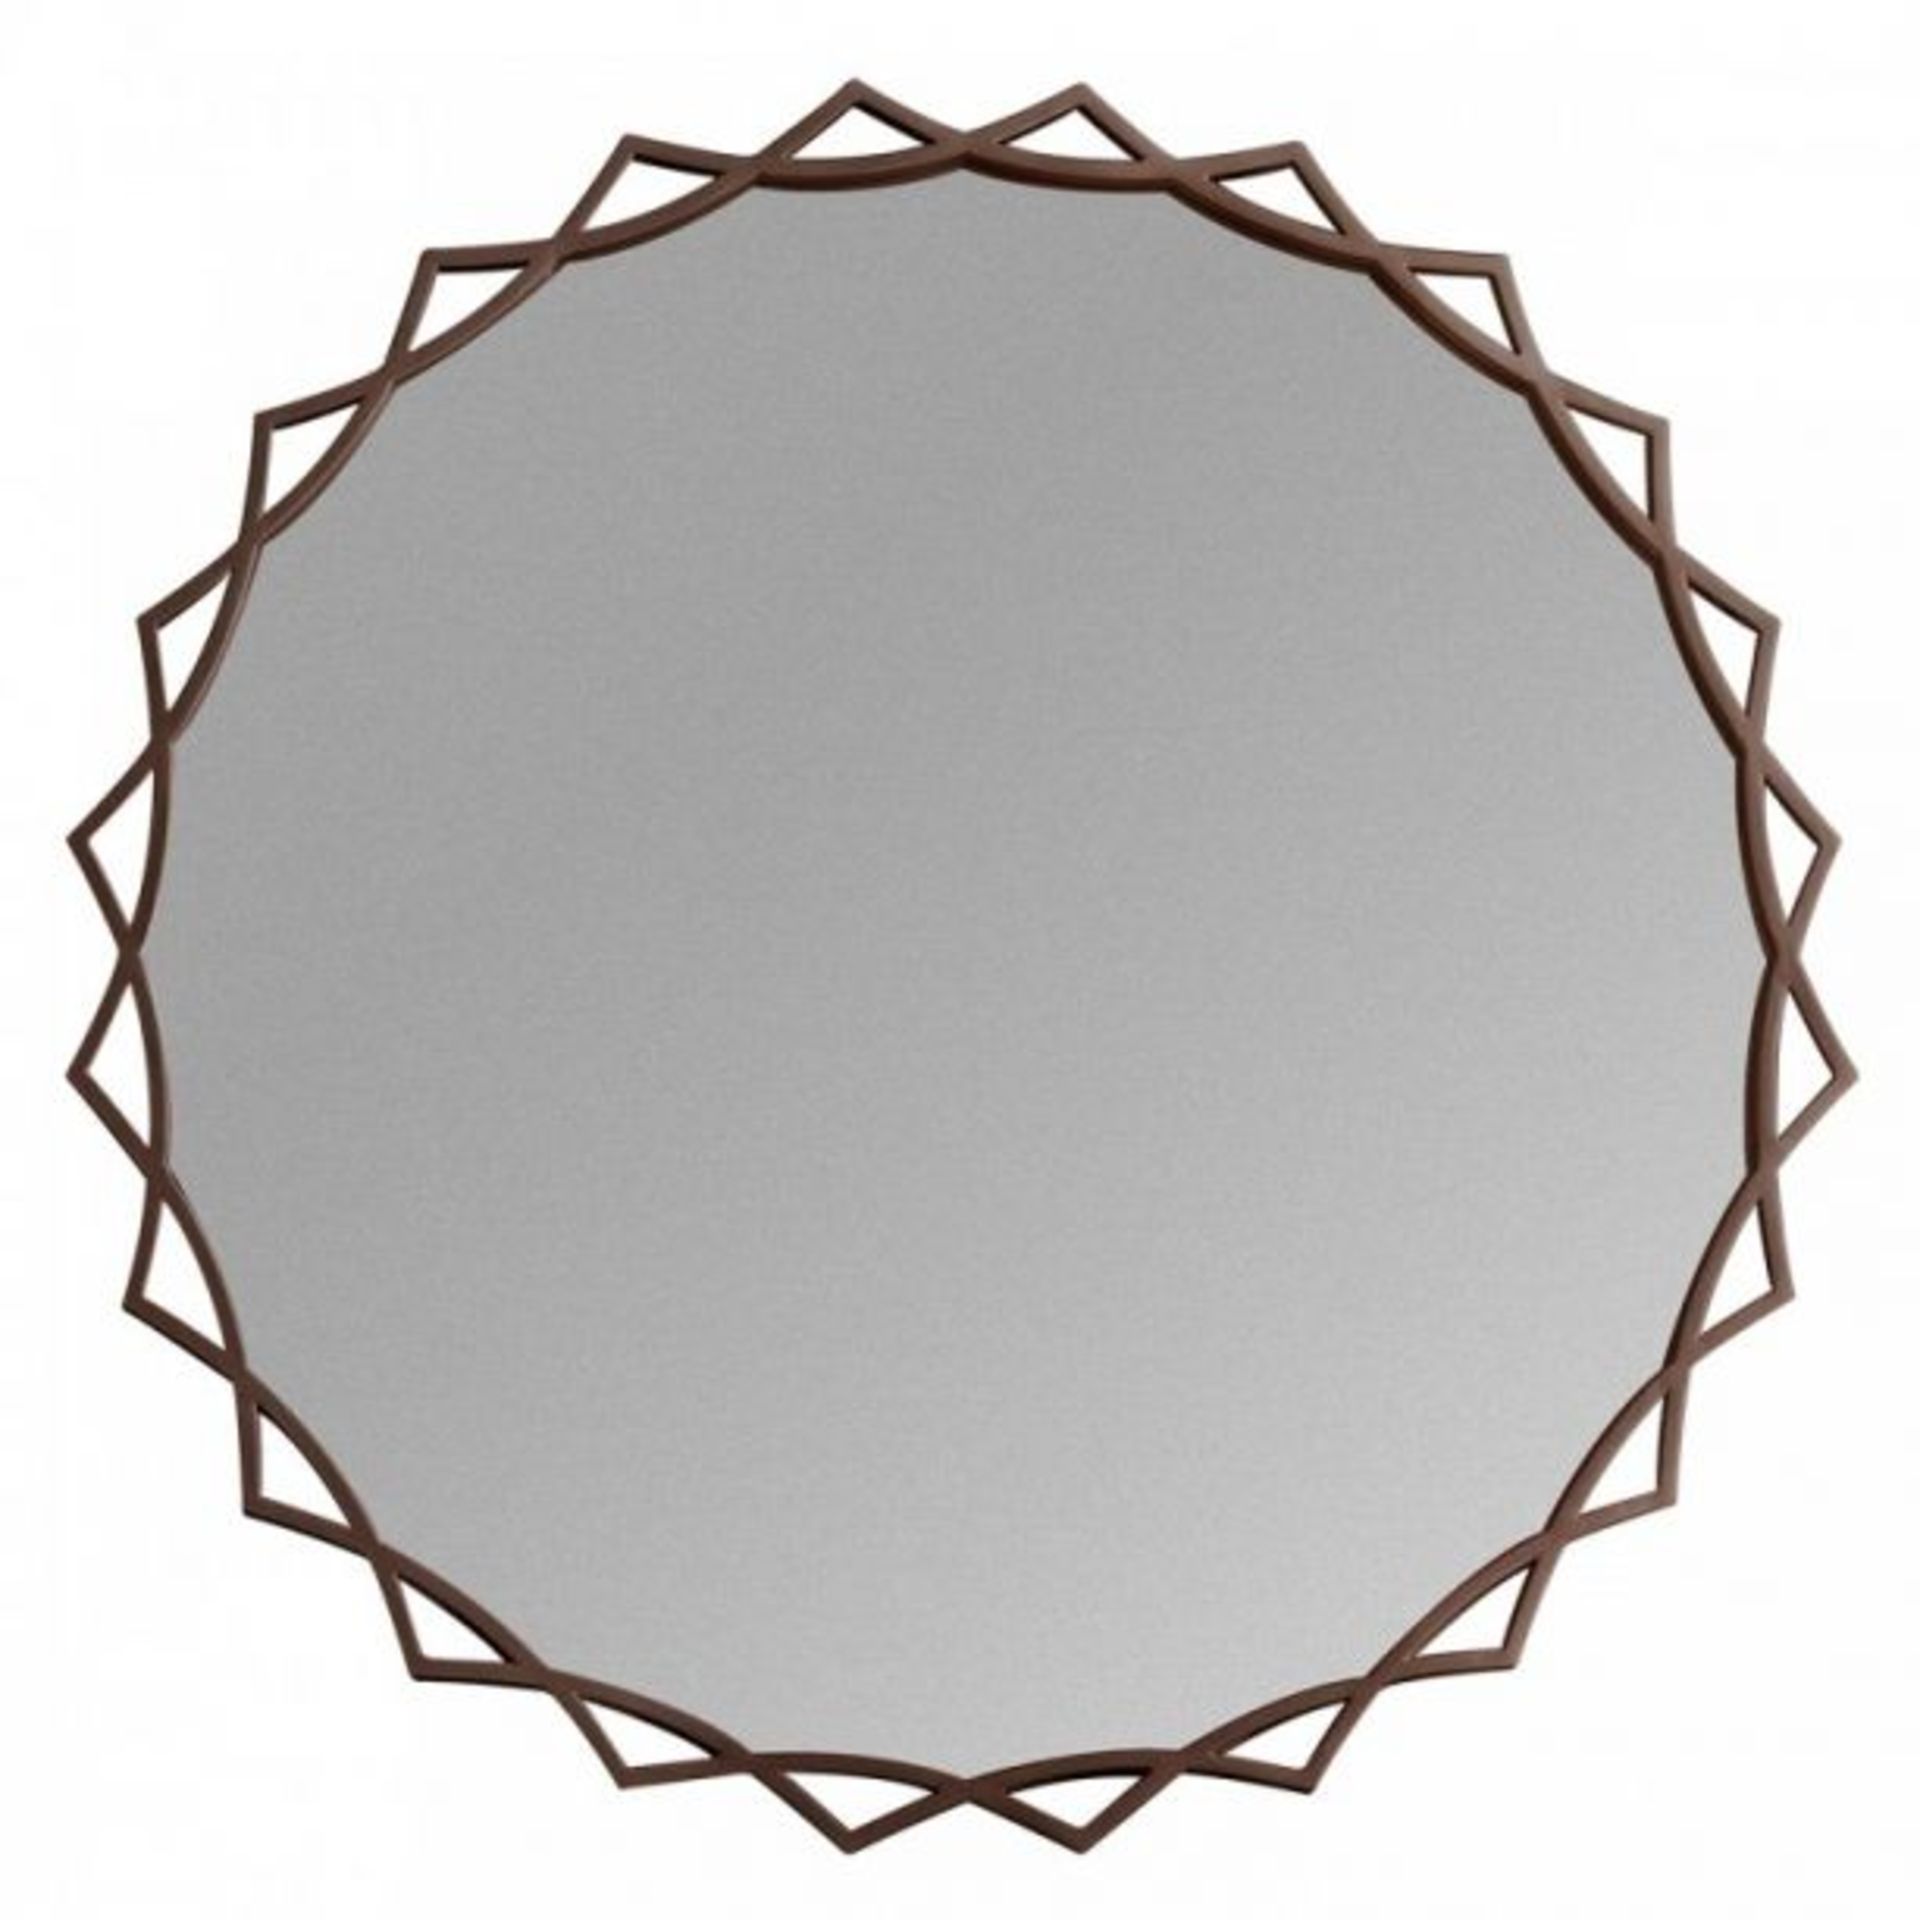 Novia Mirror Bronze A Delightful Almost Industrial Inspired Circular Mirror With A Dancing Frame - Image 2 of 2